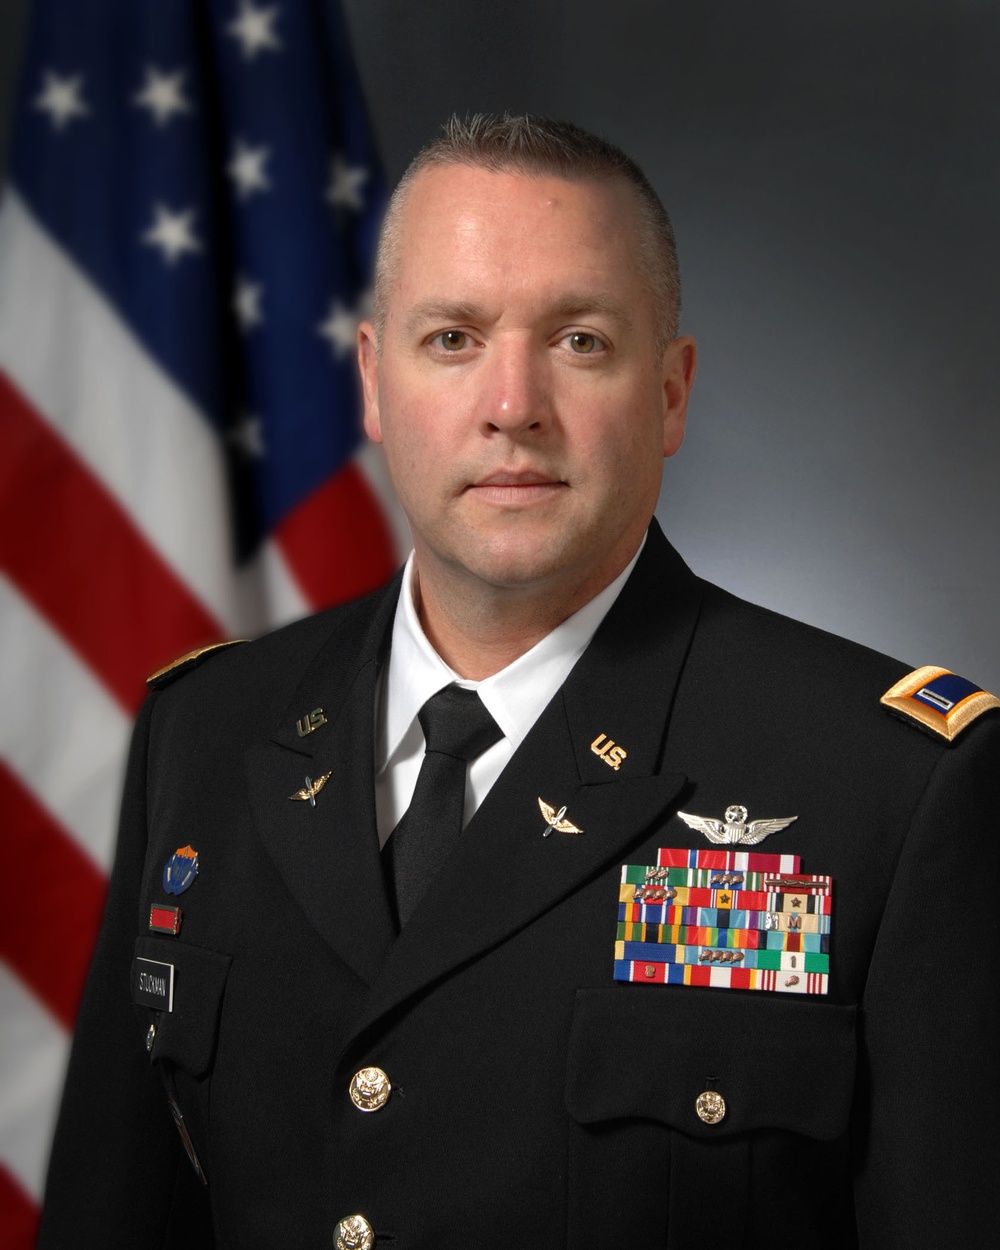 Ohio’s command chief warrant officer prepares to close chapter on storied 37-year career